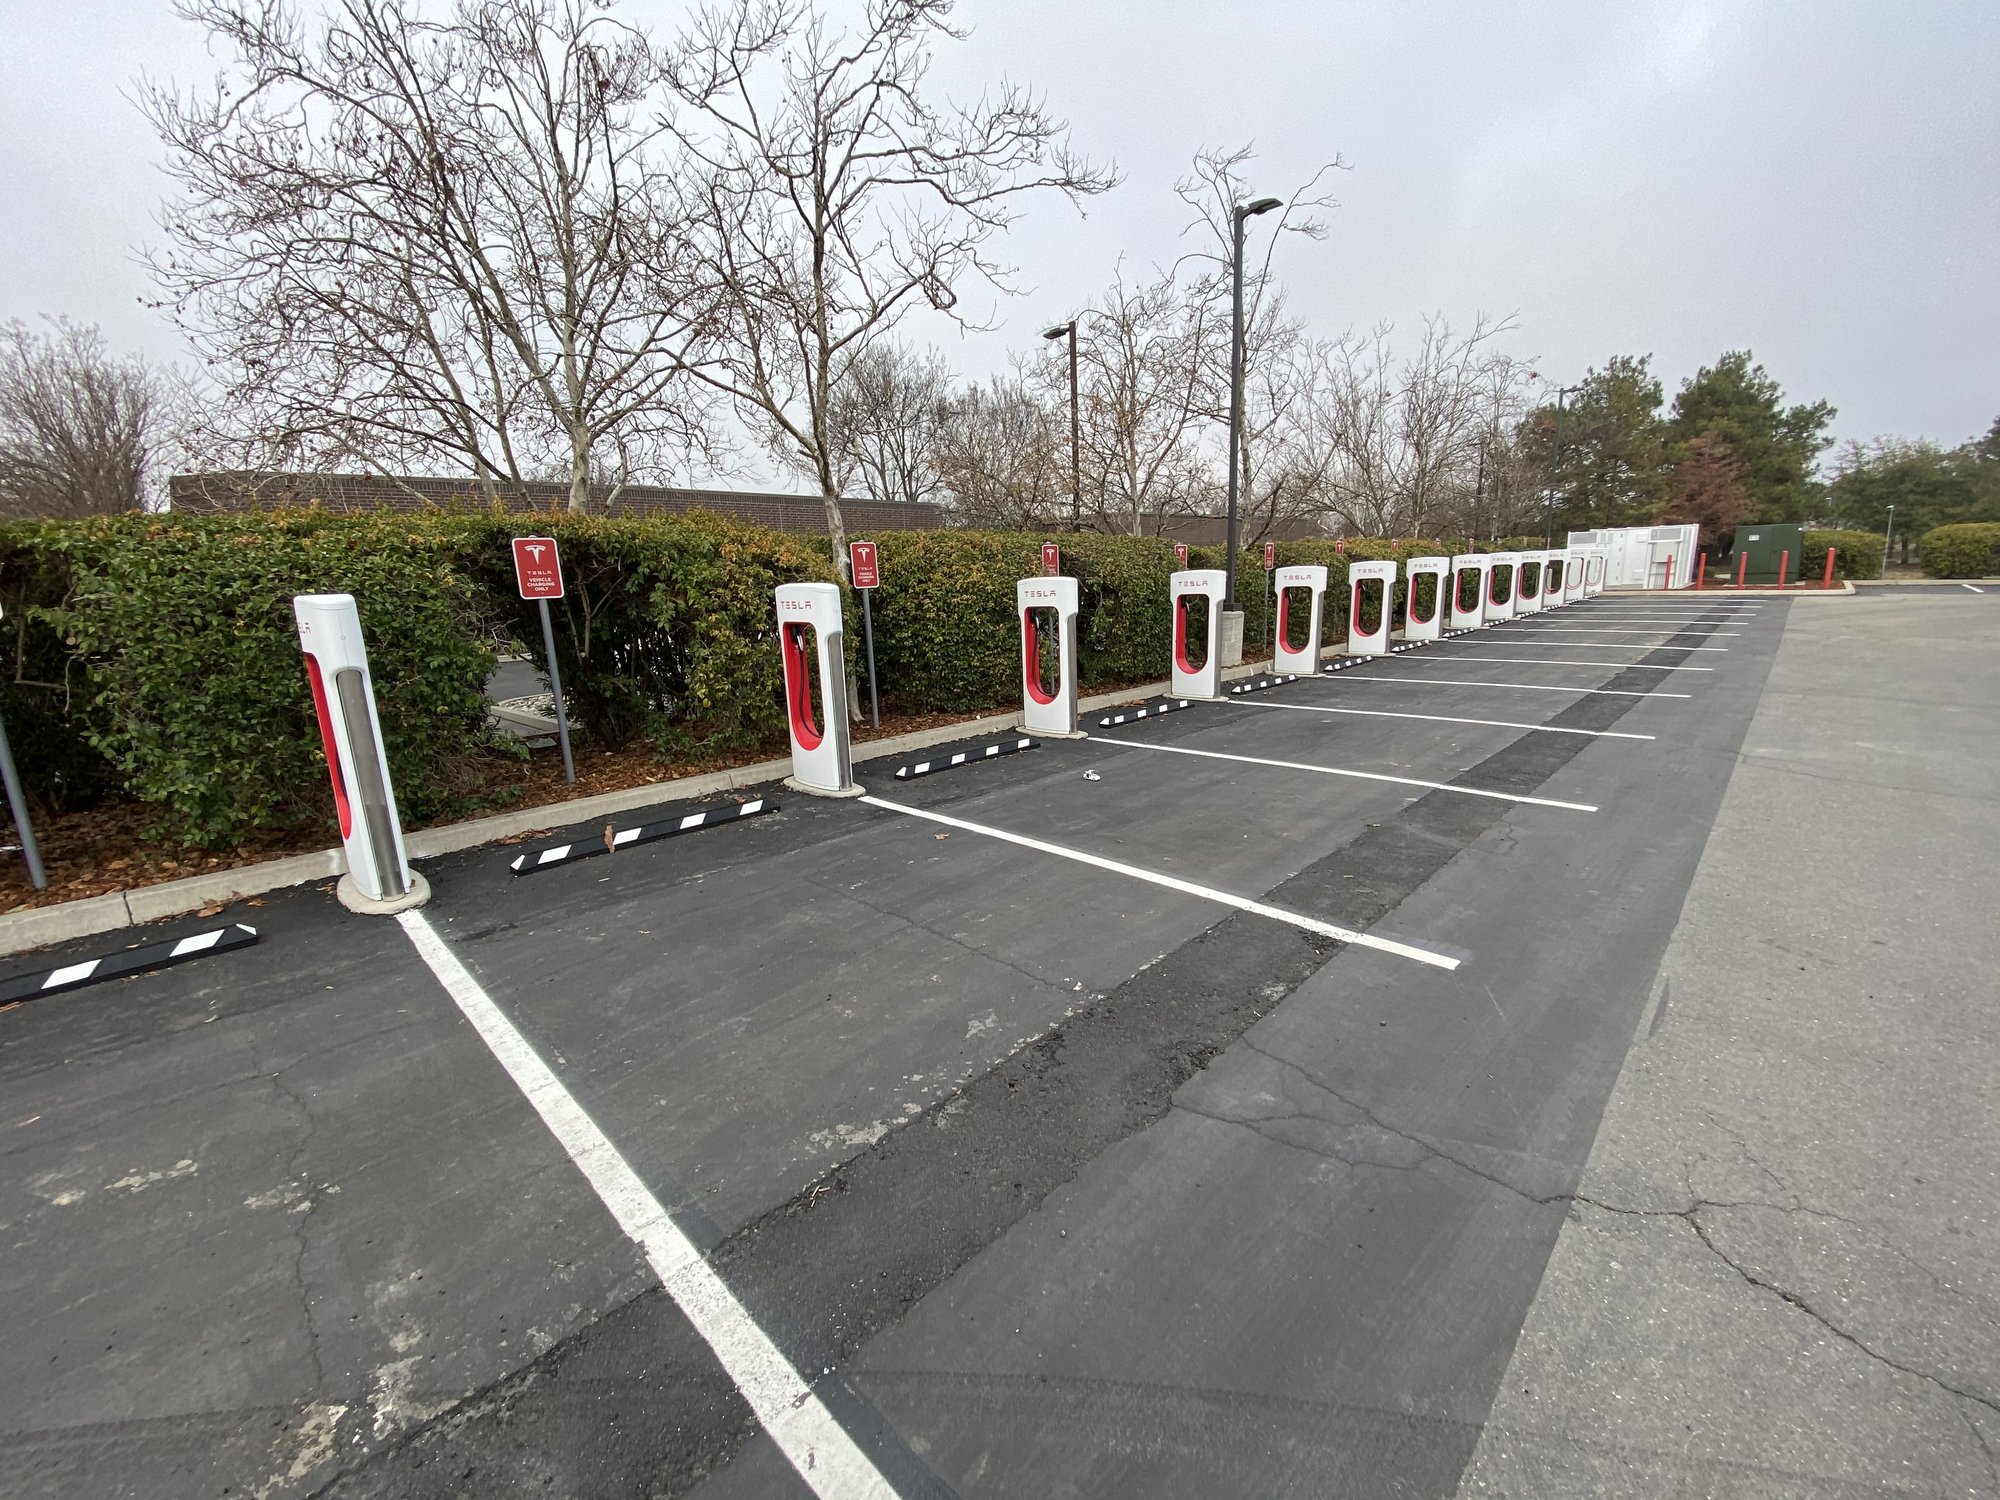 New Davis, California Superchargers (w/1st tiny visitor)